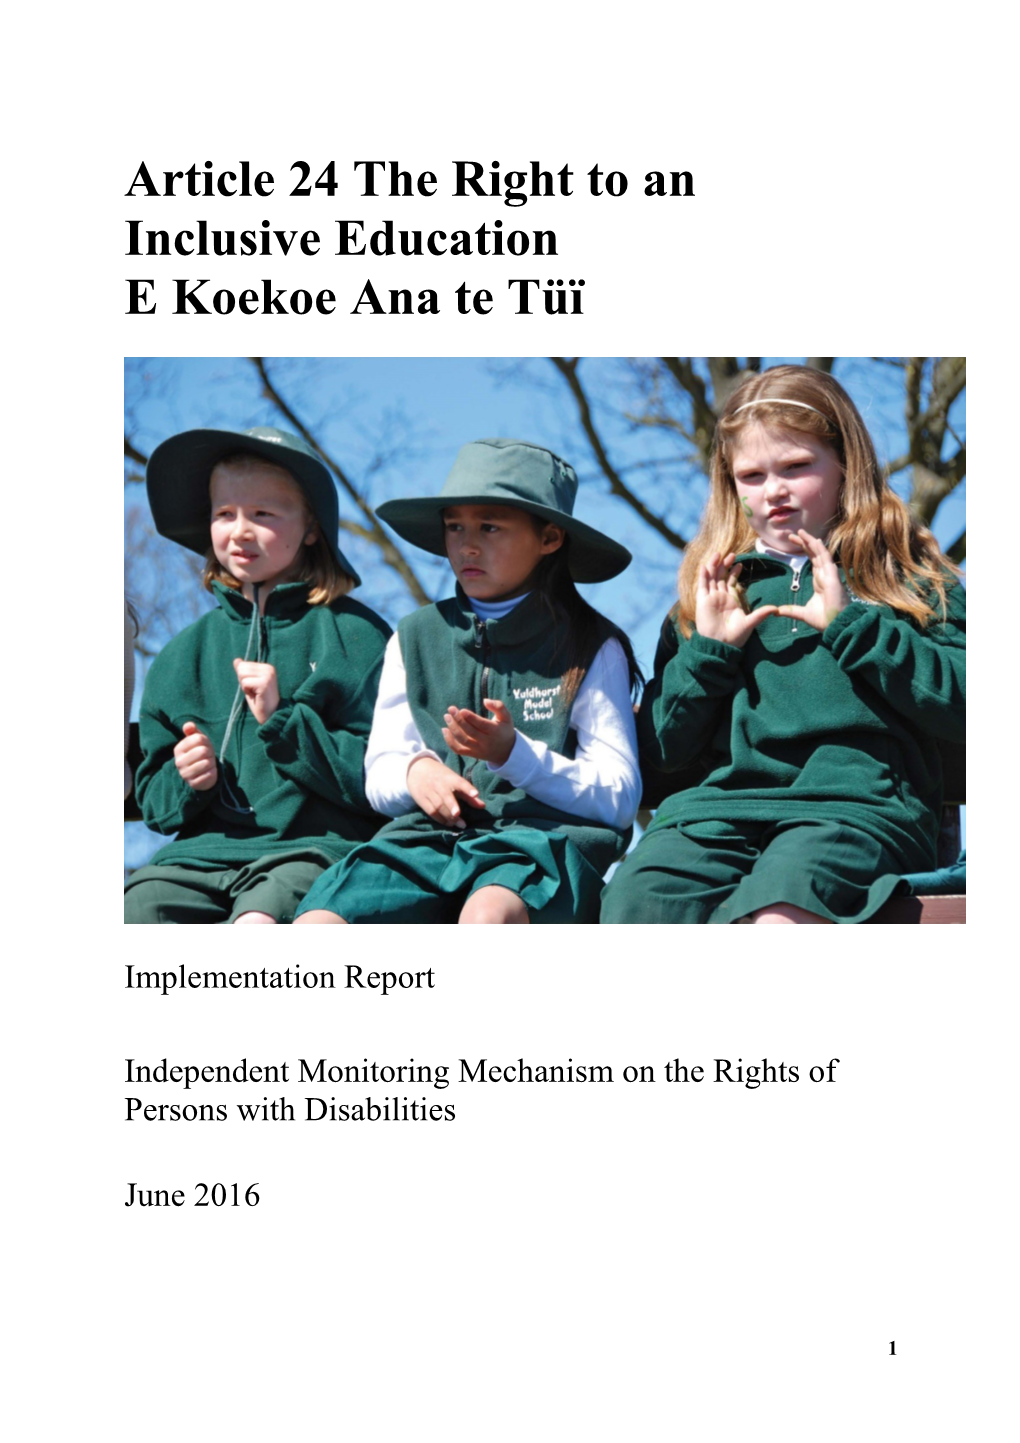 Article 24 the Right to an Inclusive Education